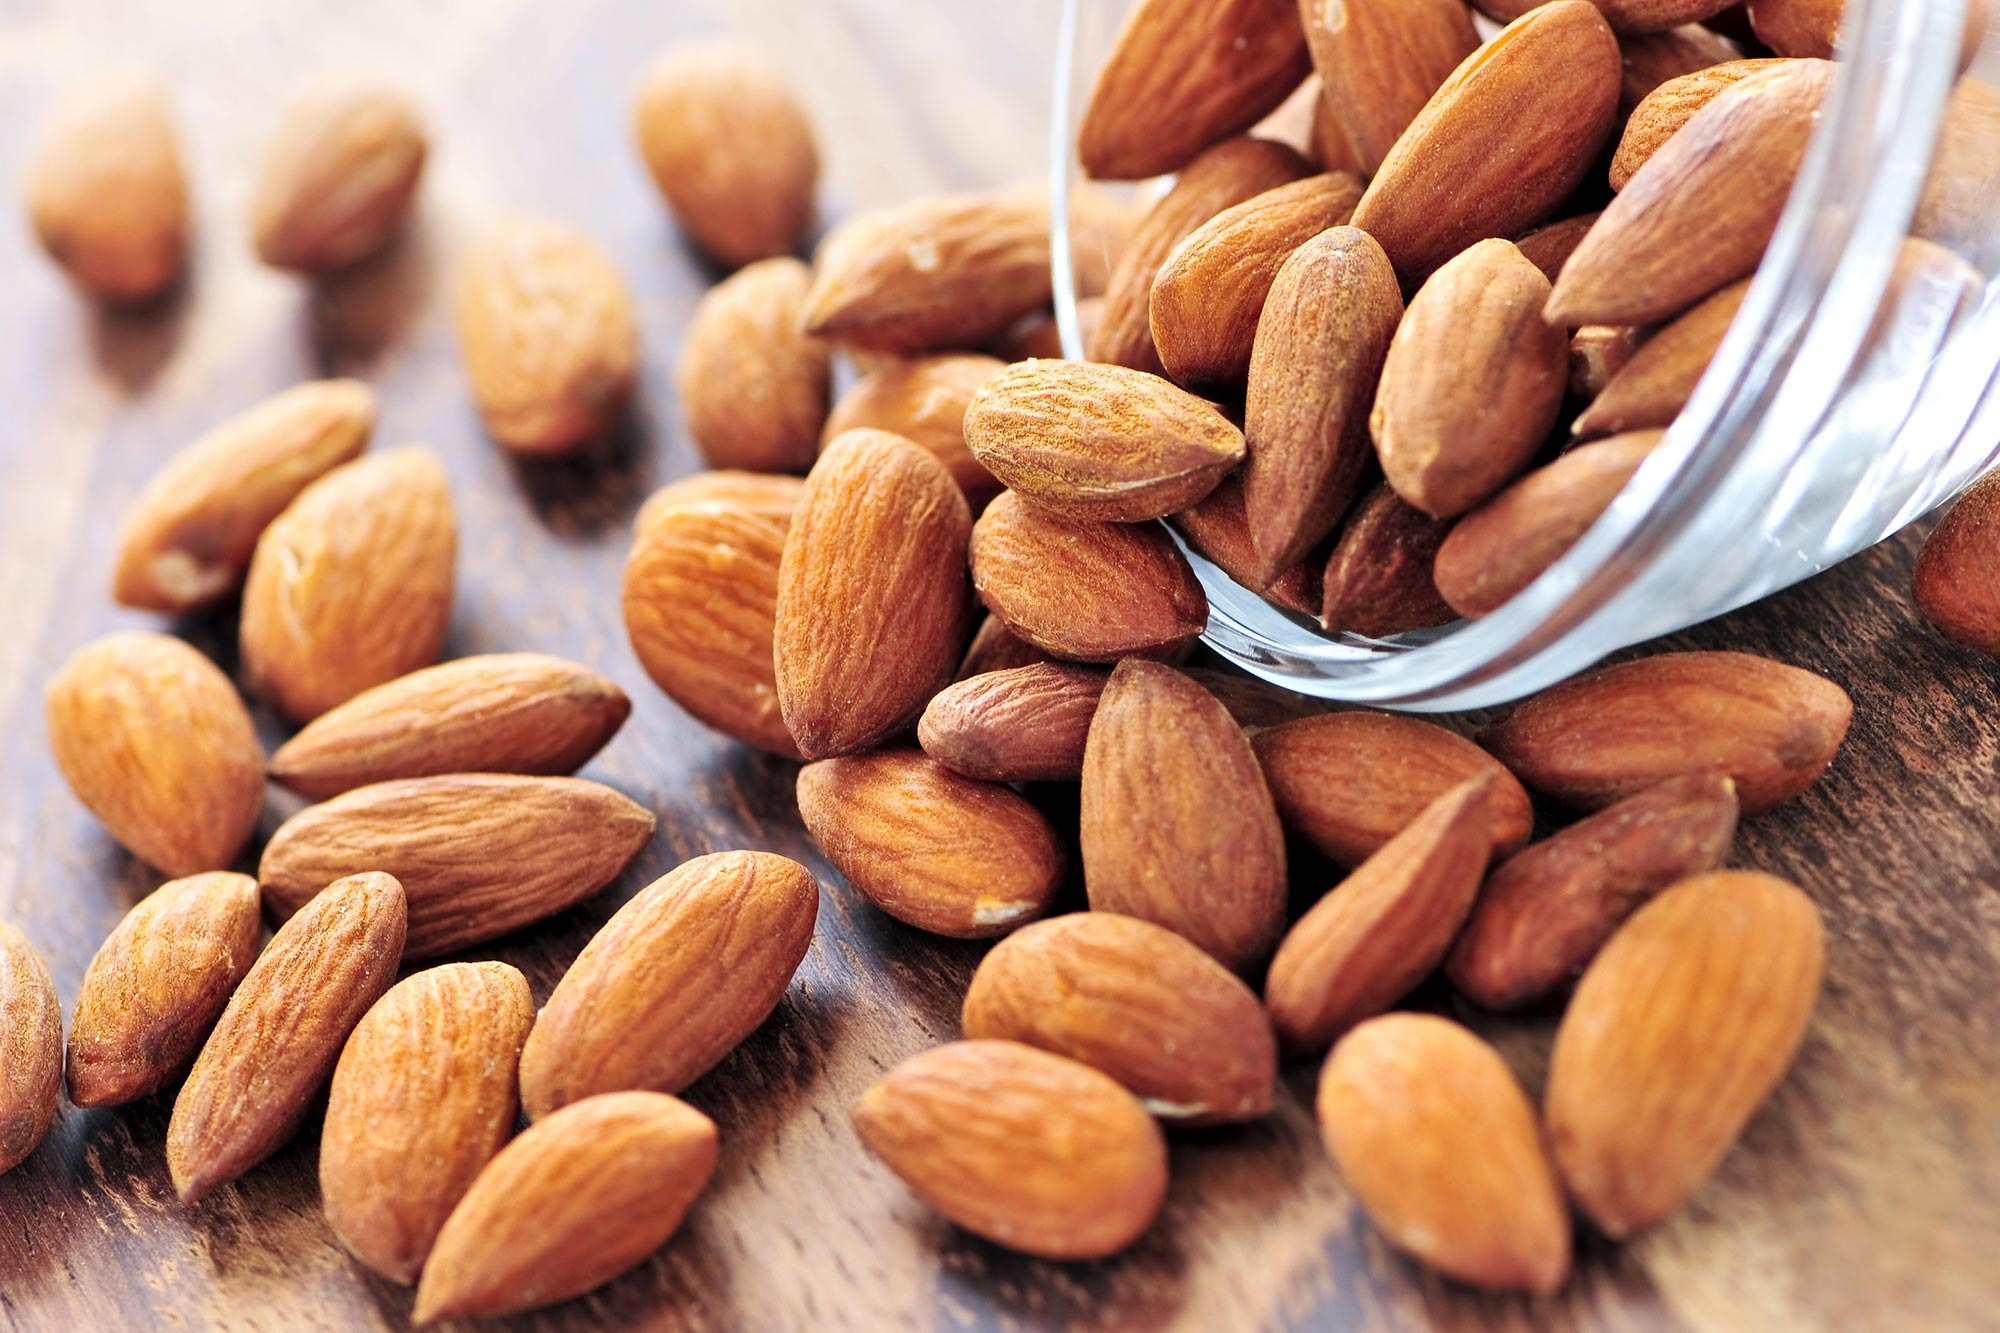 5 Fantastic Health Benefits: Make Almonds a Part of Your Daily Diet